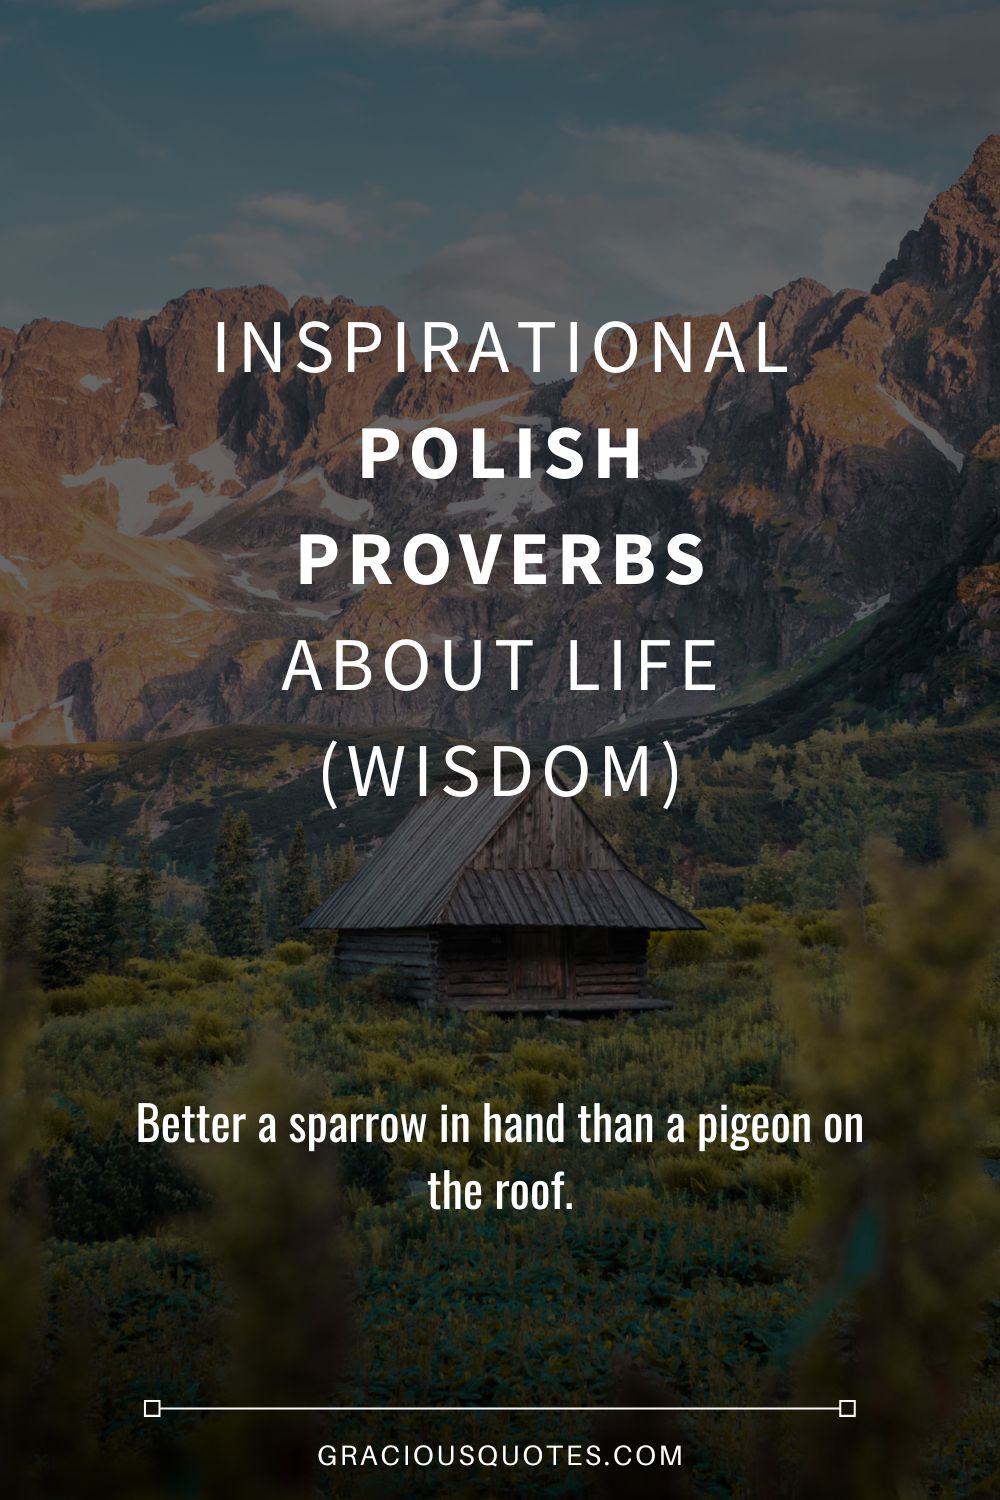 Inspirational Polish Proverbs About Life (WISDOM) - Gracious Quotes